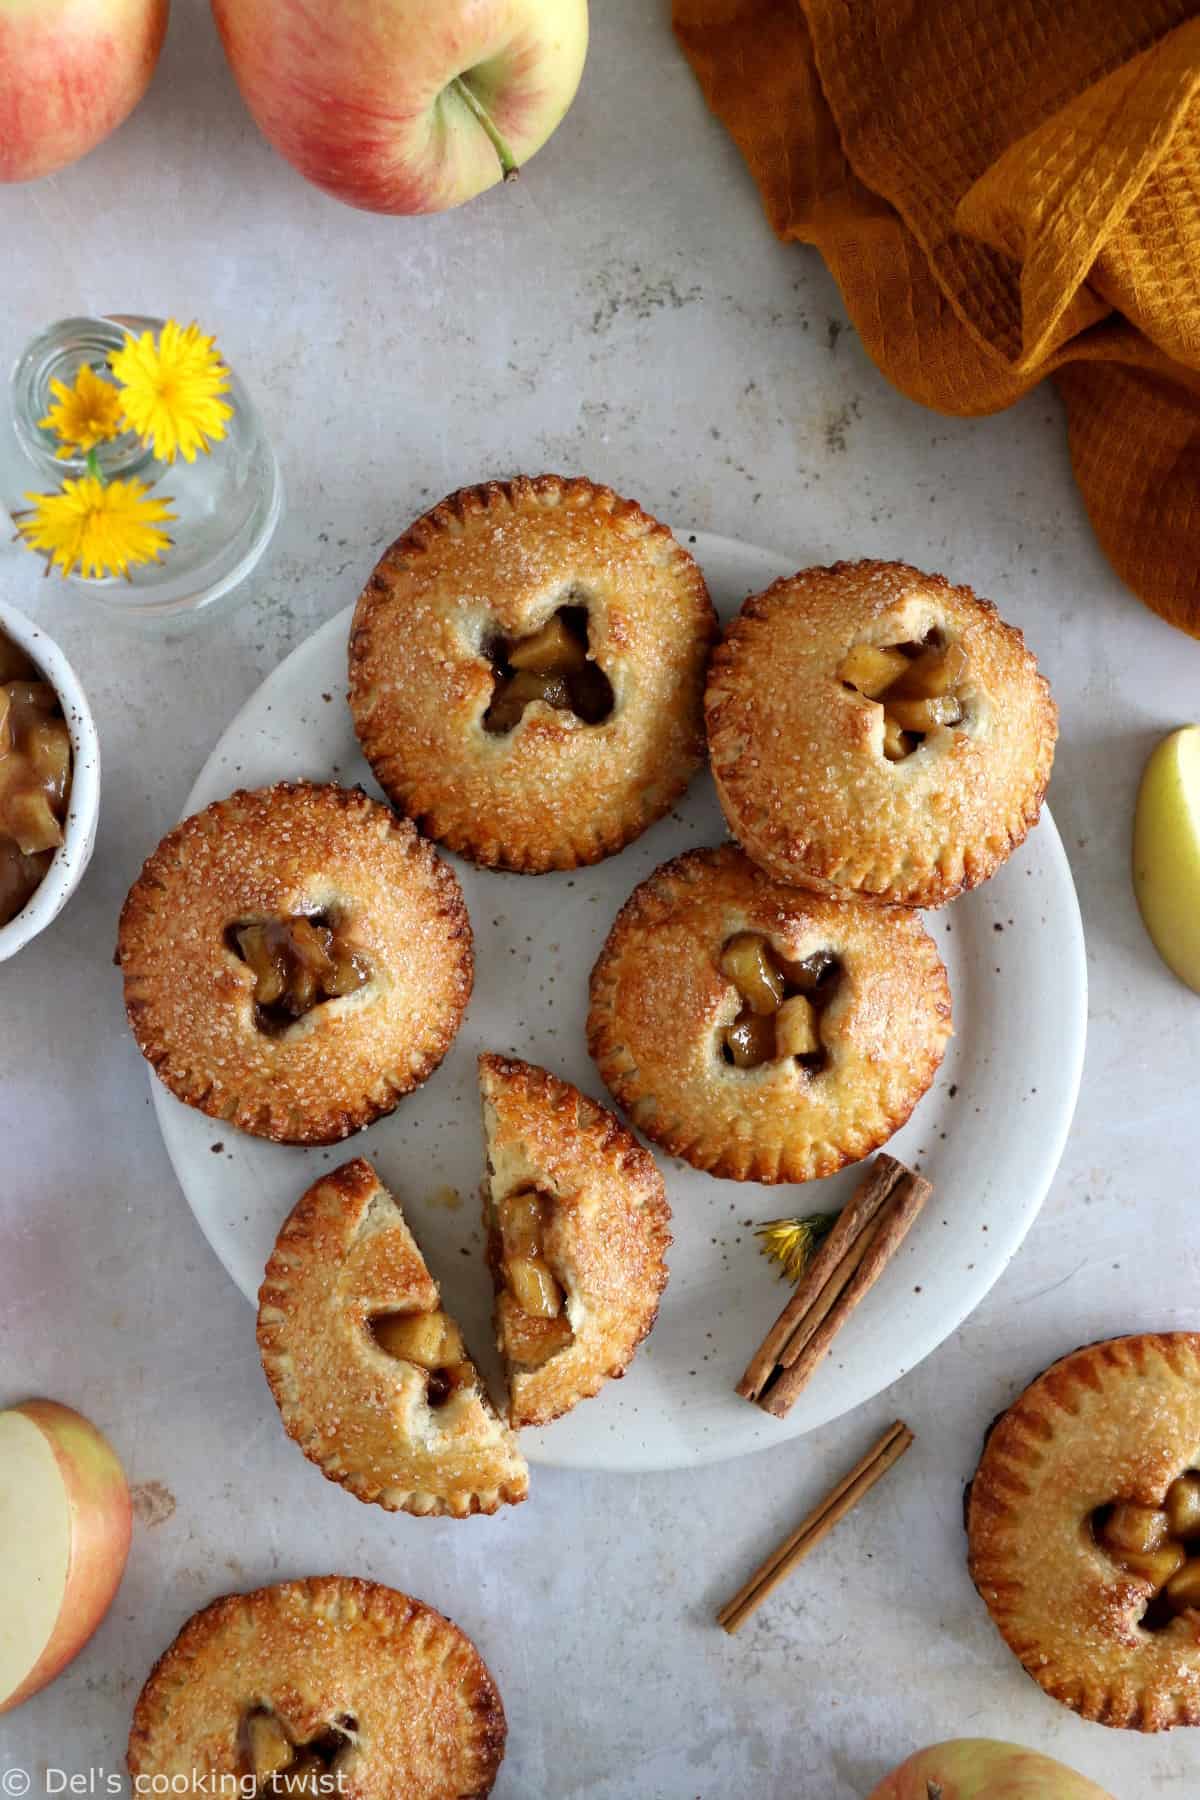 Apple hand pies are like apple pie in individual portions. They feature a sweet apple cinnamon filling inside an irresistible flaky crust.